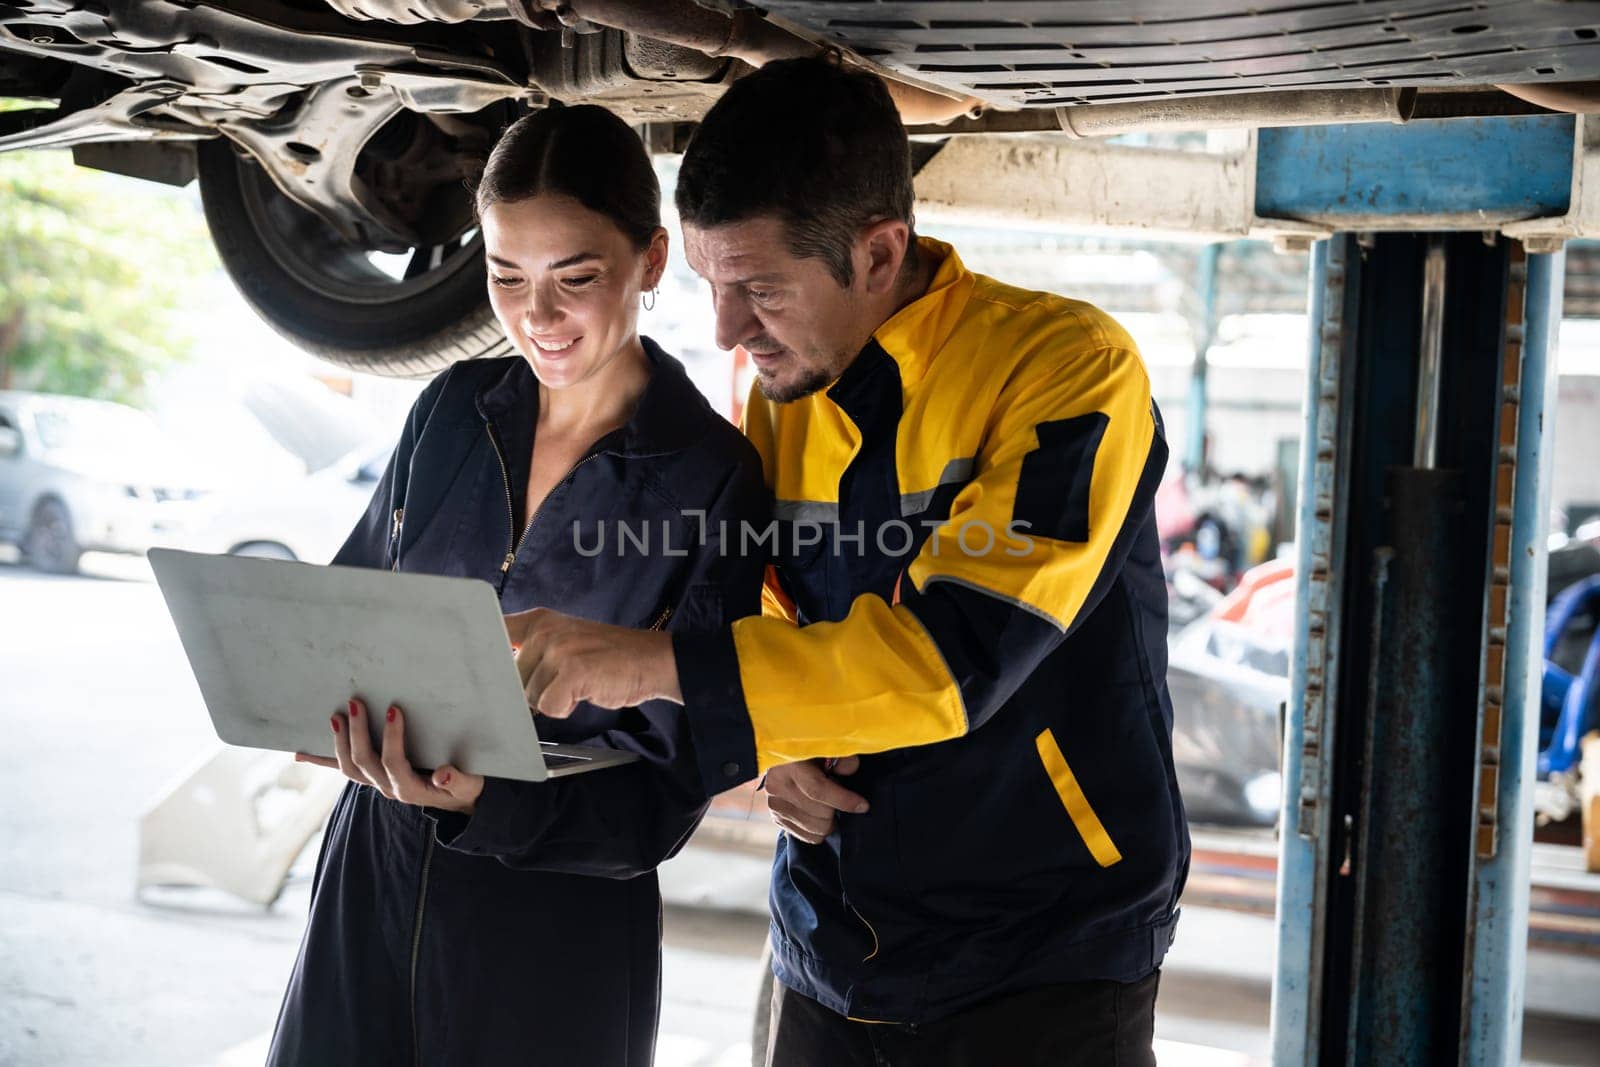 Two vehicle mechanic working together underneath lifted car, conduct car inspection with laptop. Automotive service technician in uniform carefully make diagnostic troubleshooting. Oxus